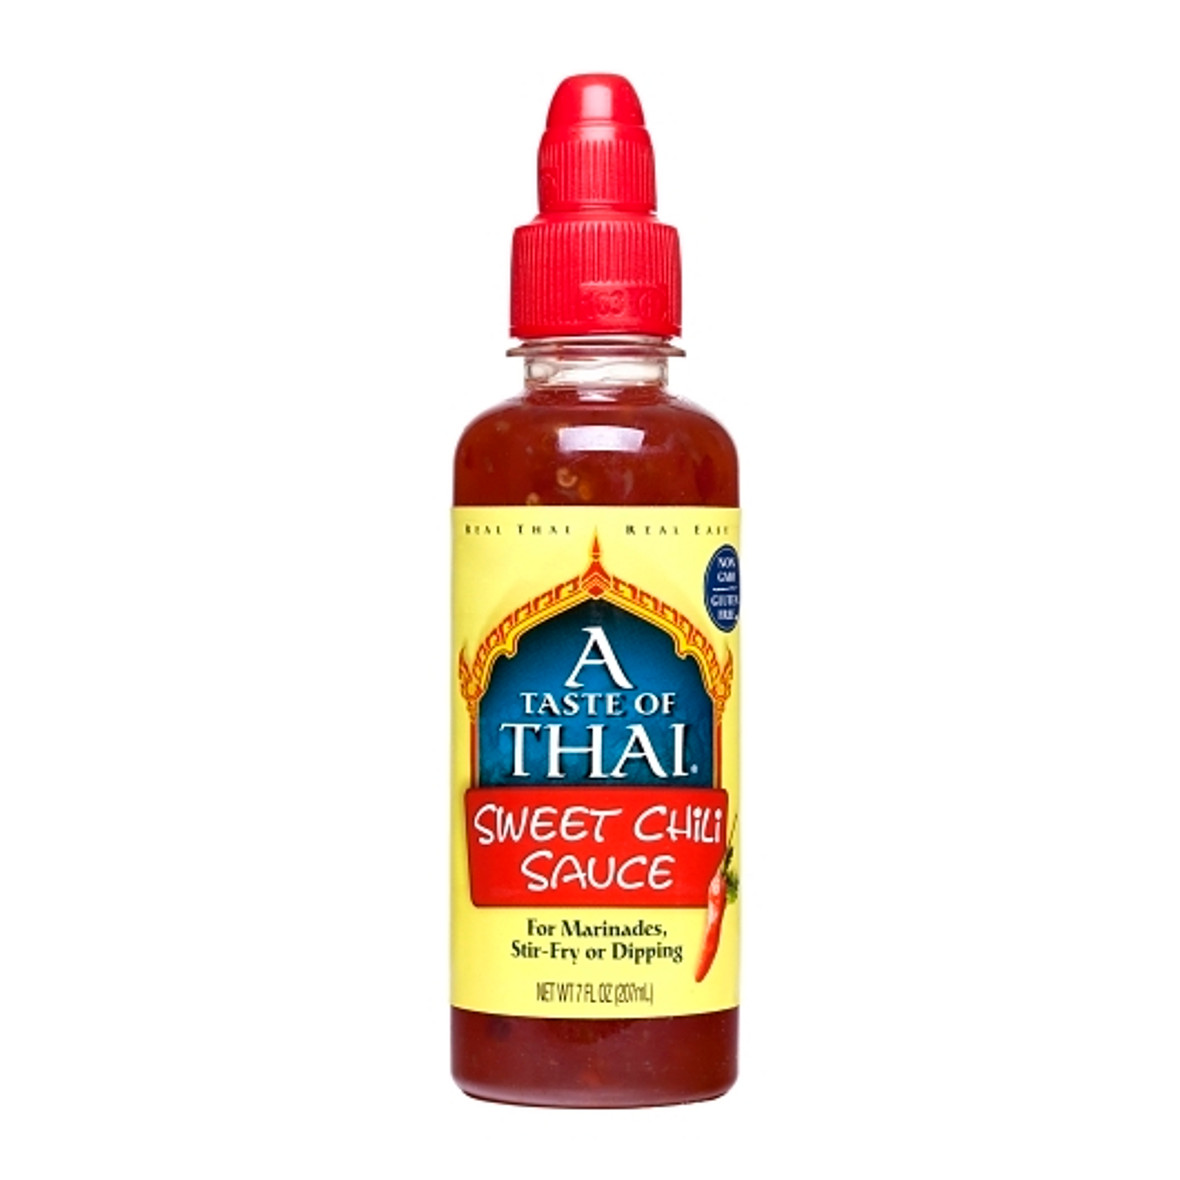 A Taste of Thai Sweet Red Chili Sauce, 7 Fluid Ounce, 12 Per Case